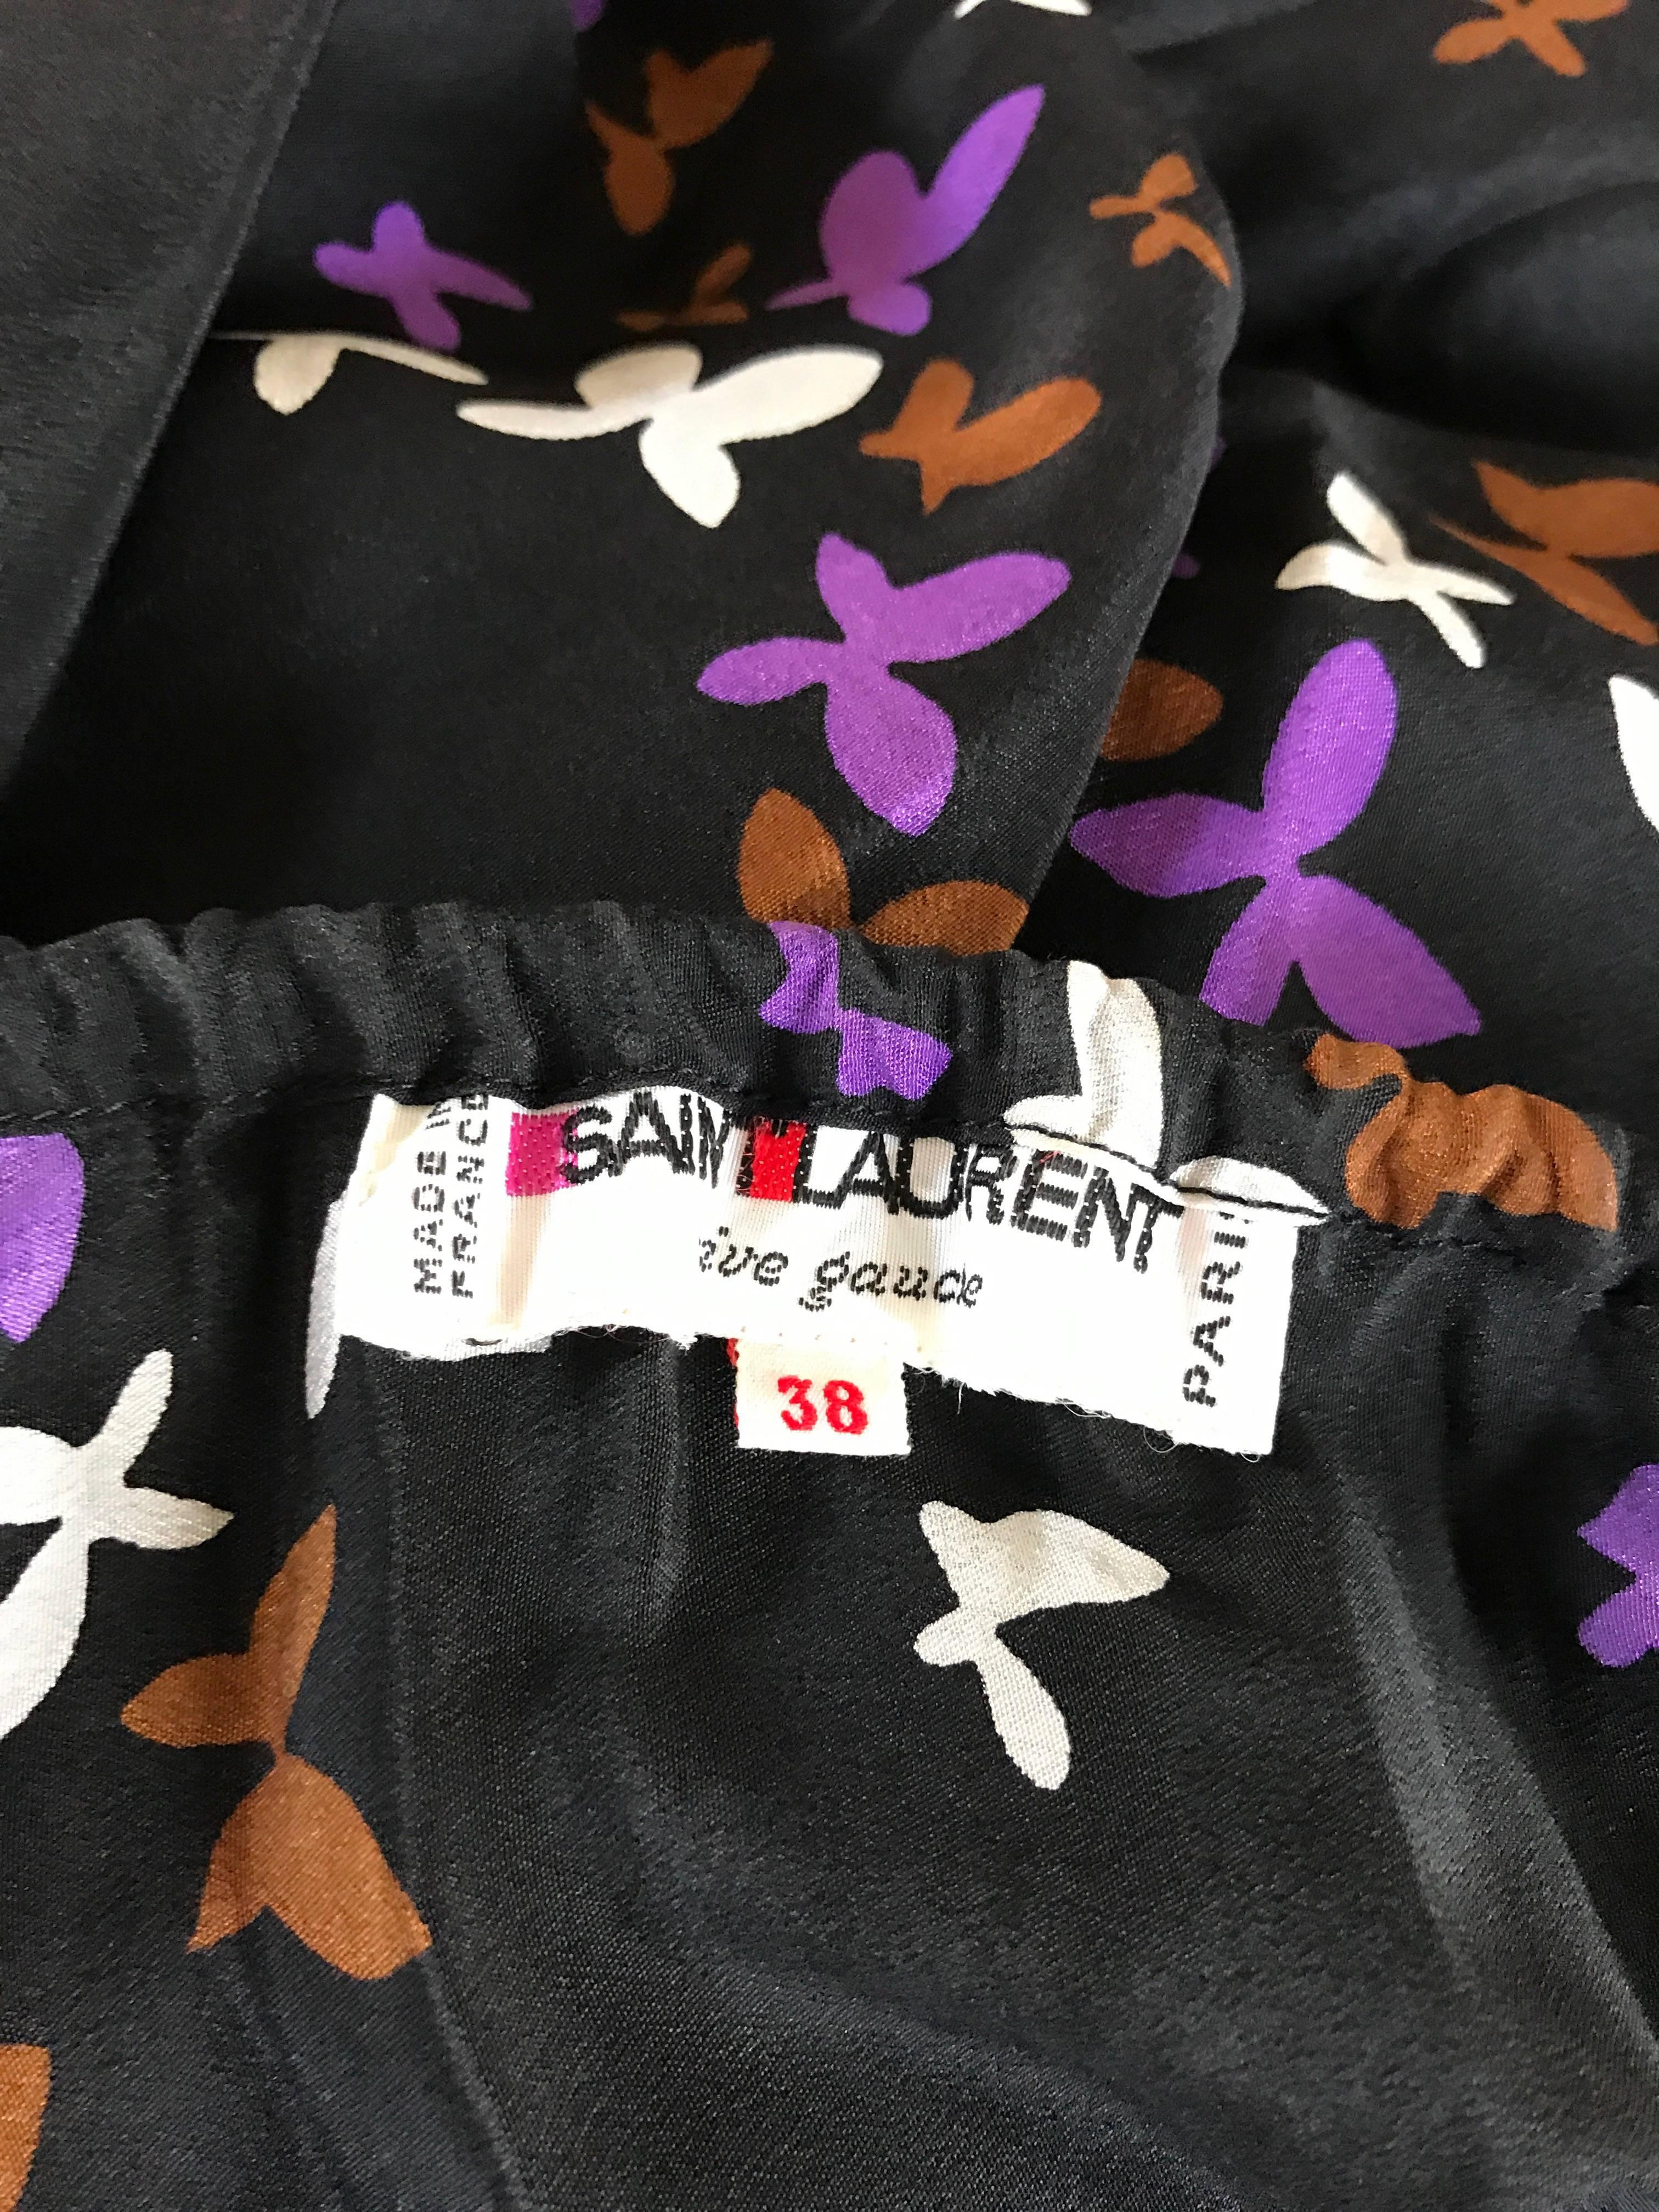 Yves Saint Laurent S/S 1978 Silk Butterly Print Halter Maxi Dress Gown In Excellent Condition For Sale In Portsmouth, Hampshire